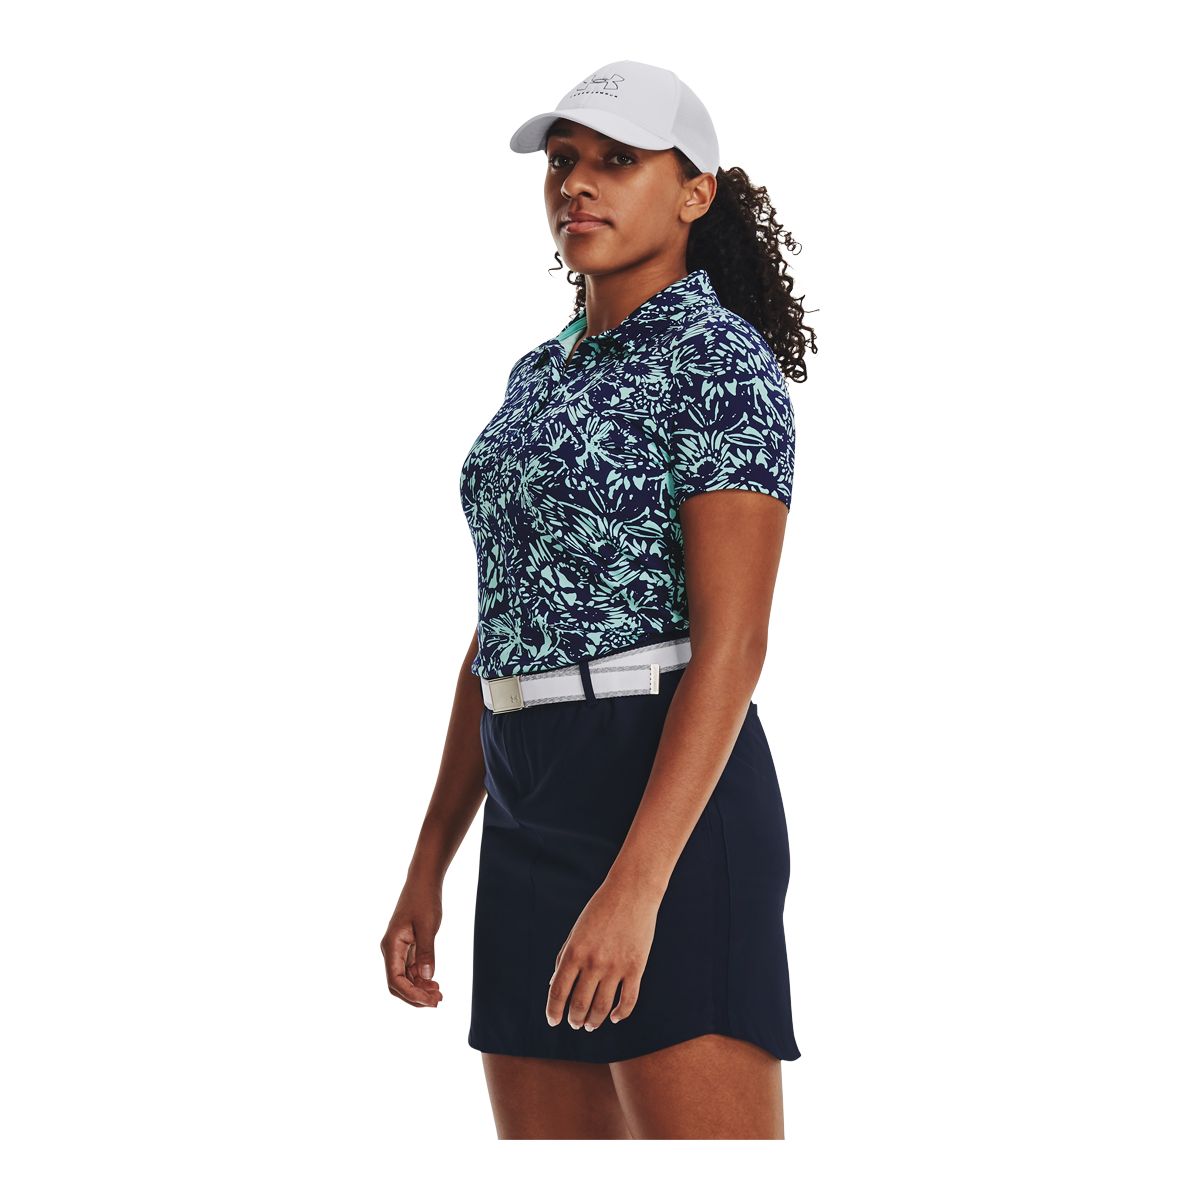 Image of Under Armour Women's Zinger Printed Polo T Shirt